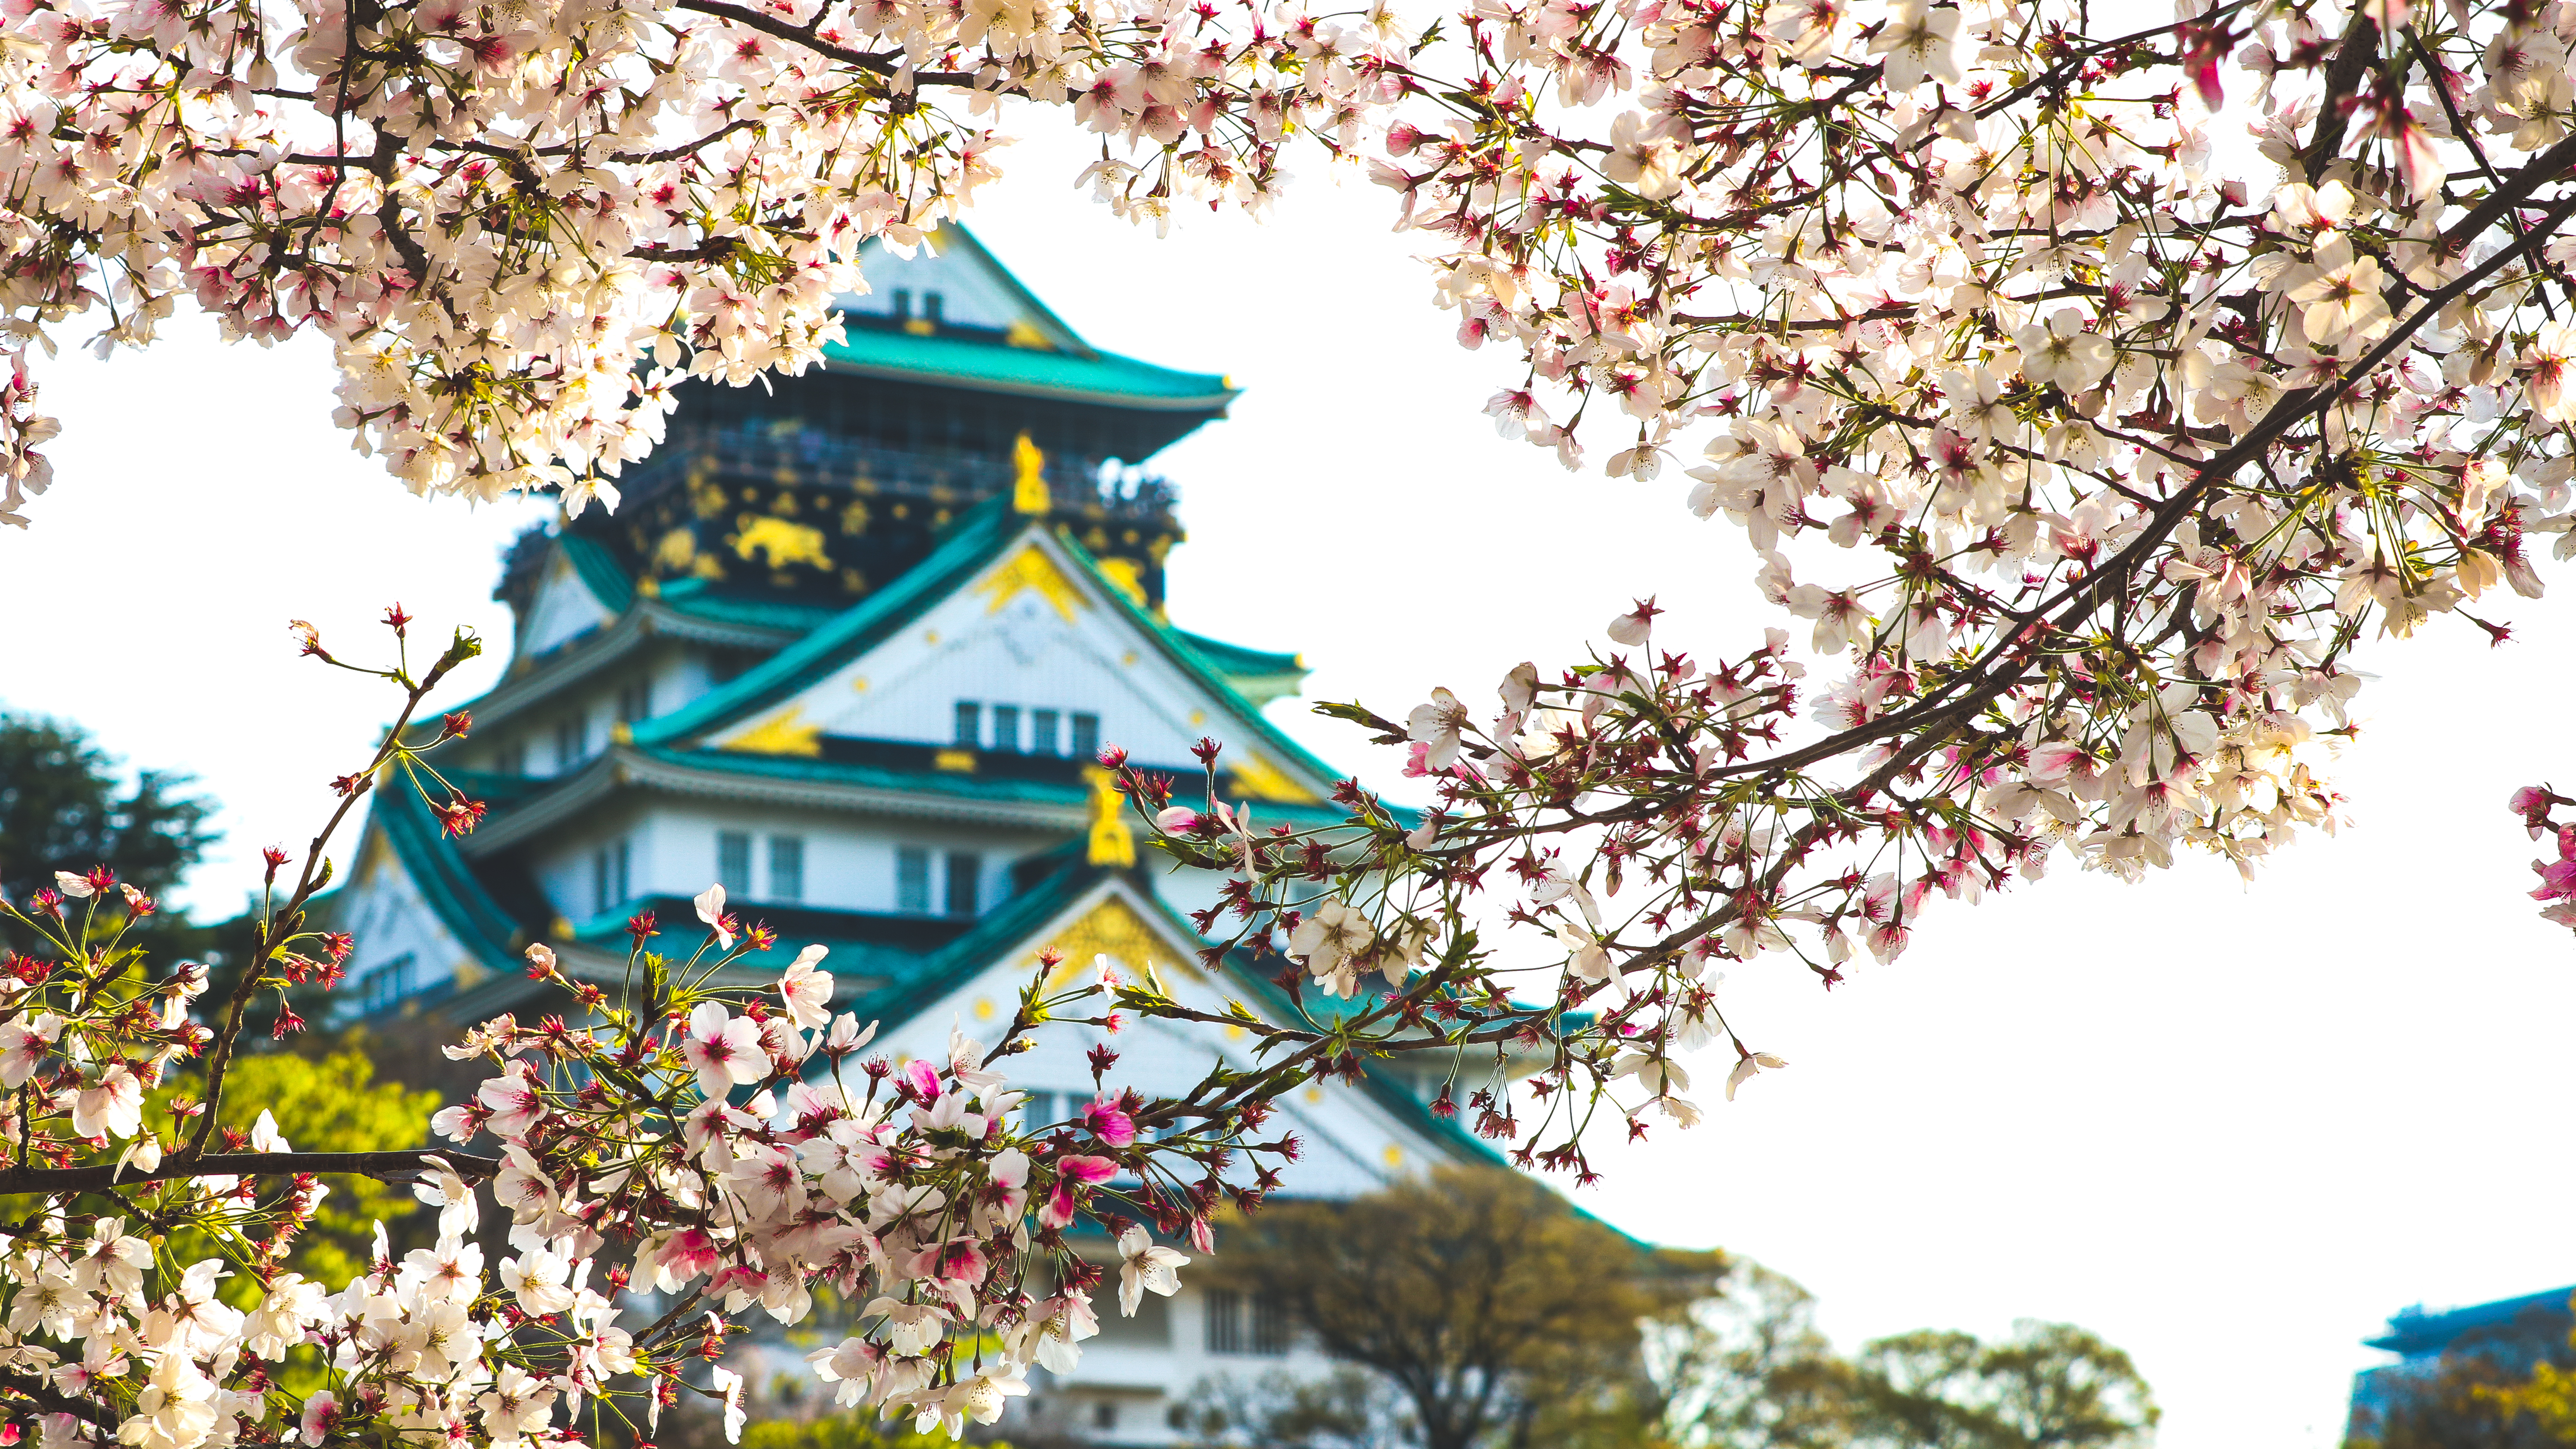 General 6000x3375 castle cherry blossom Asia plants flowers branch Asian architecture Japan Osaka Osaka Castle blurred